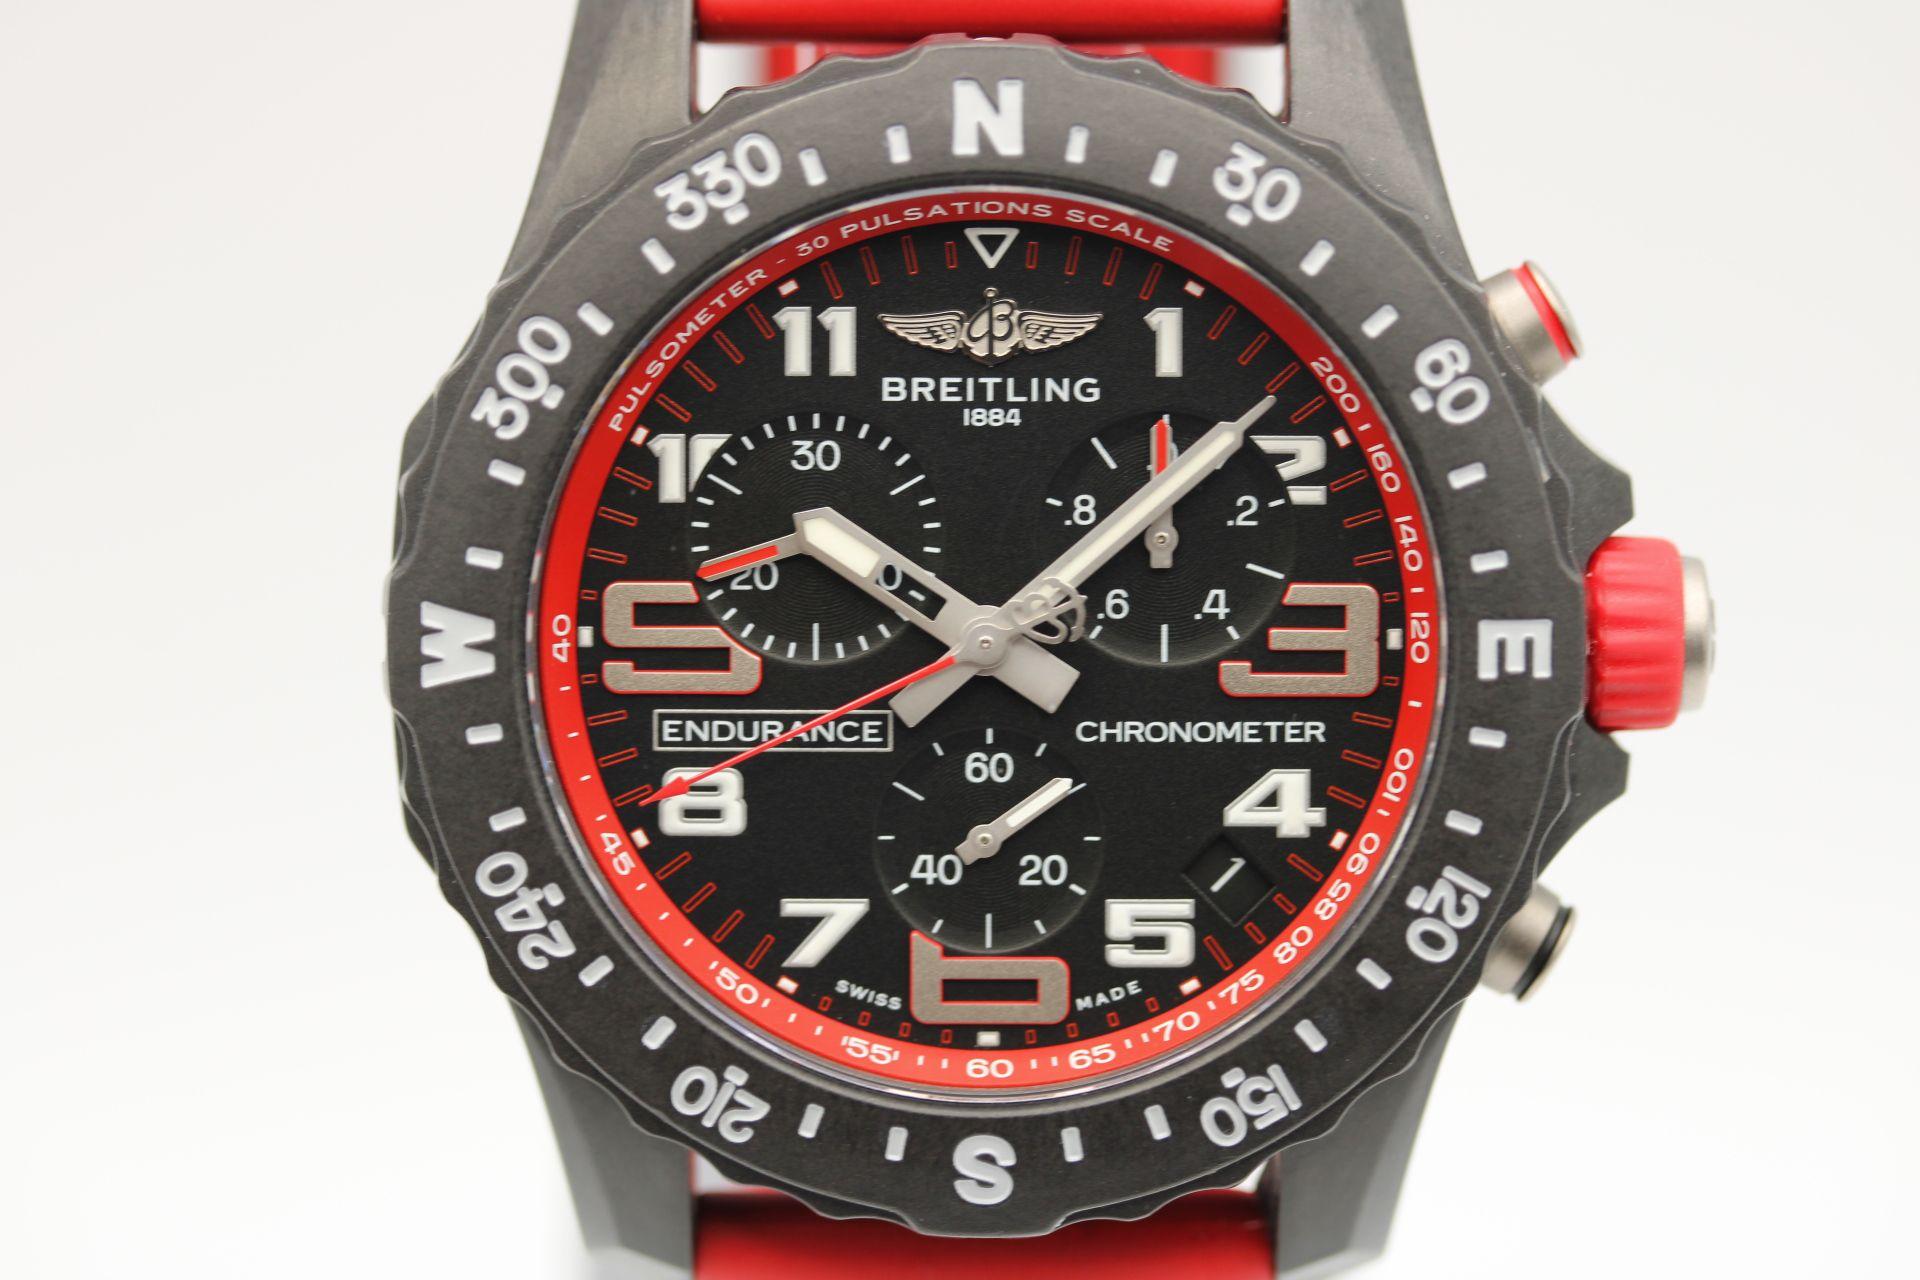 Breitling Endurance Pro X82310D91B1S1 In Excellent Condition For Sale In London, GB